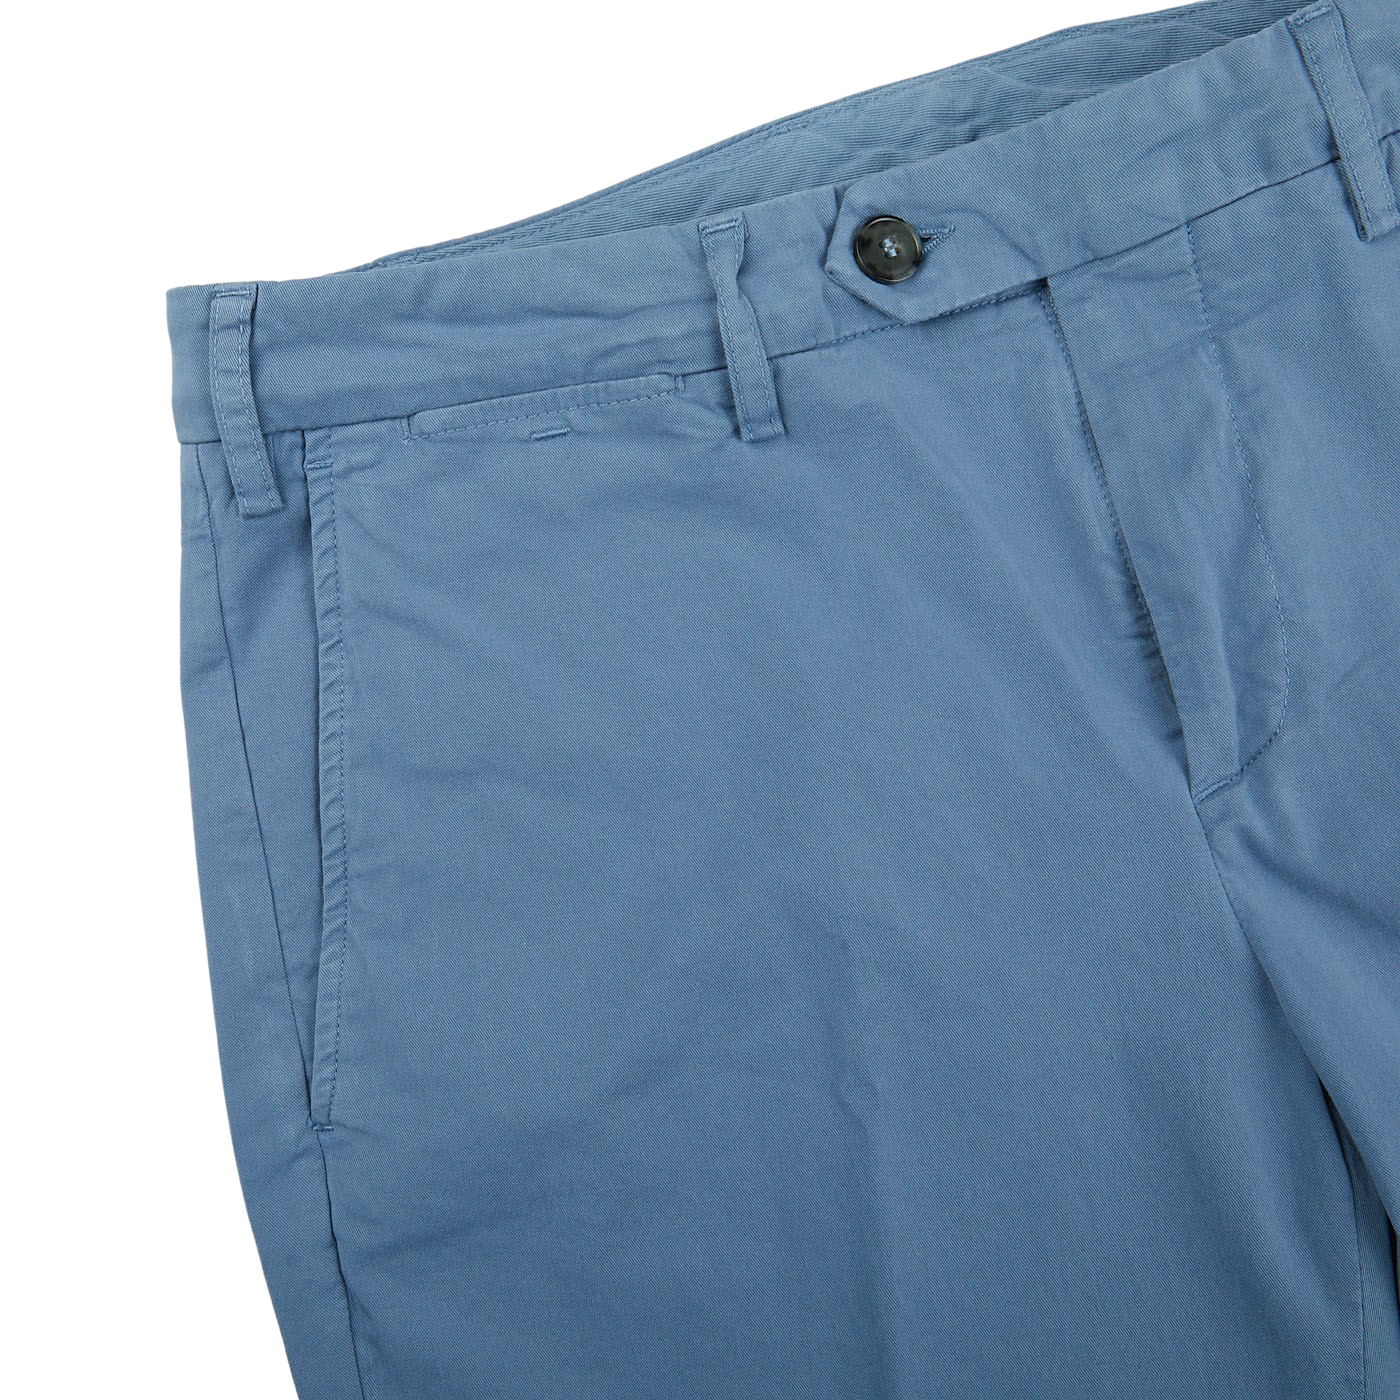 The men's Canali Light Blue Cotton Stretch Flat Front Chinos shorts.